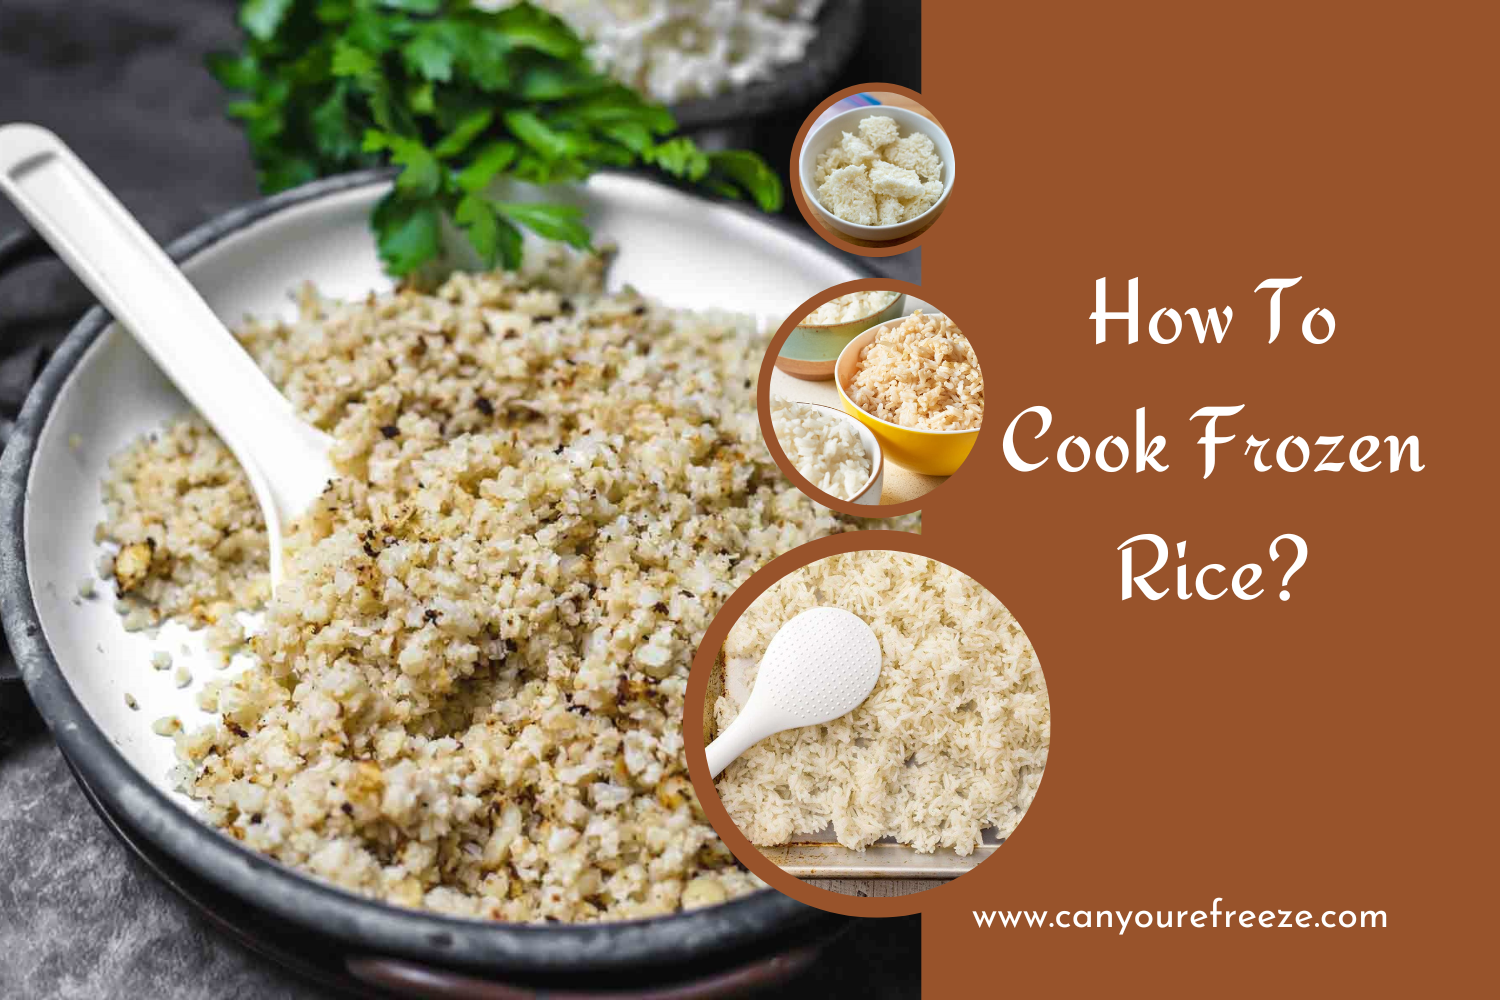 How To Cook Frozen Rice